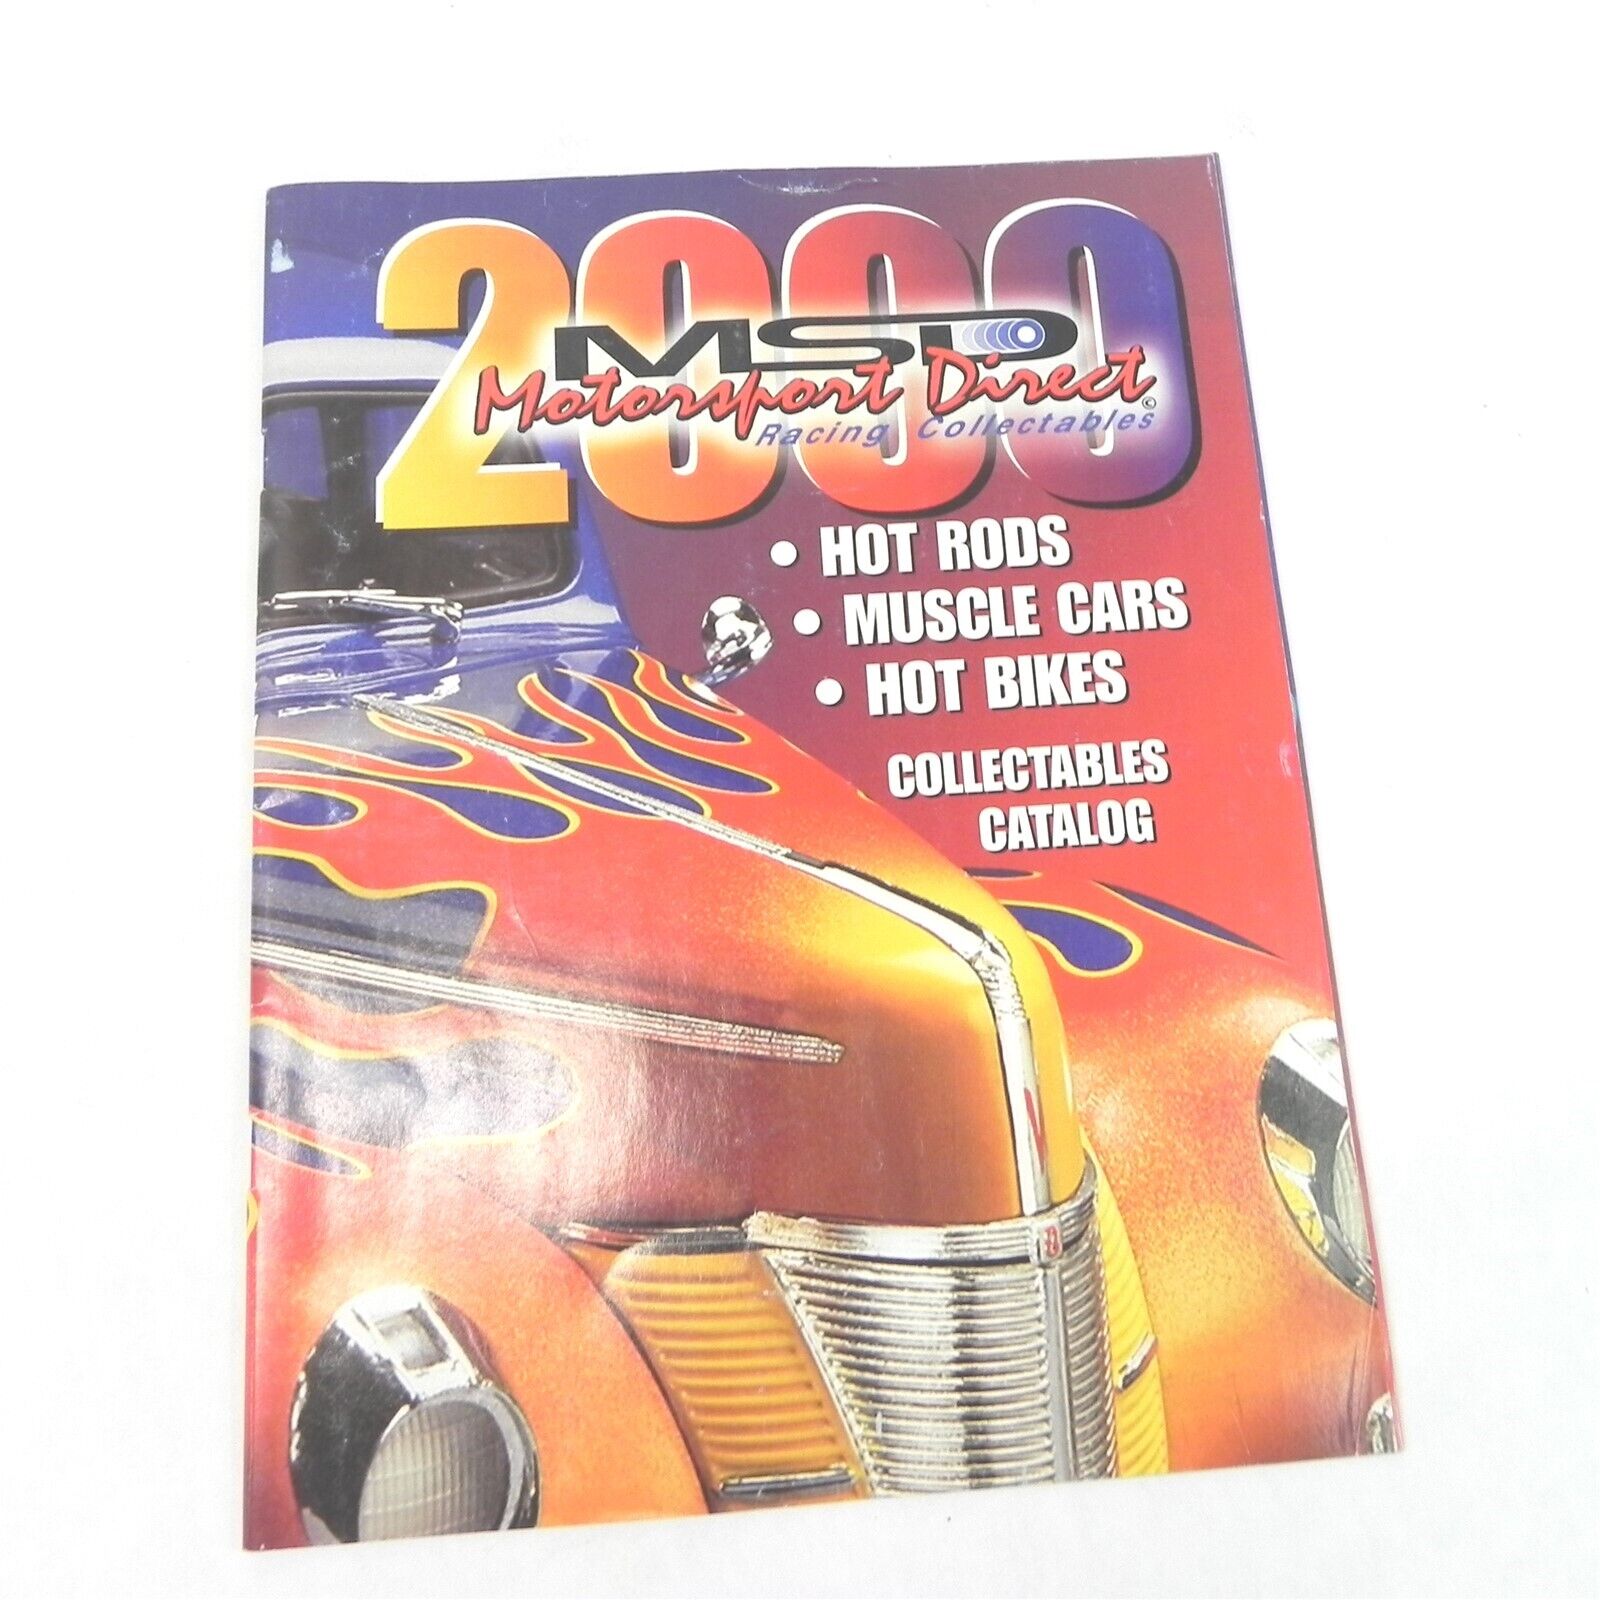 VINTAGE 2000 MSD MOTORSPORT DIRECT CATALOG RACING COLLECTIBLES HOT RODS MUSCLE